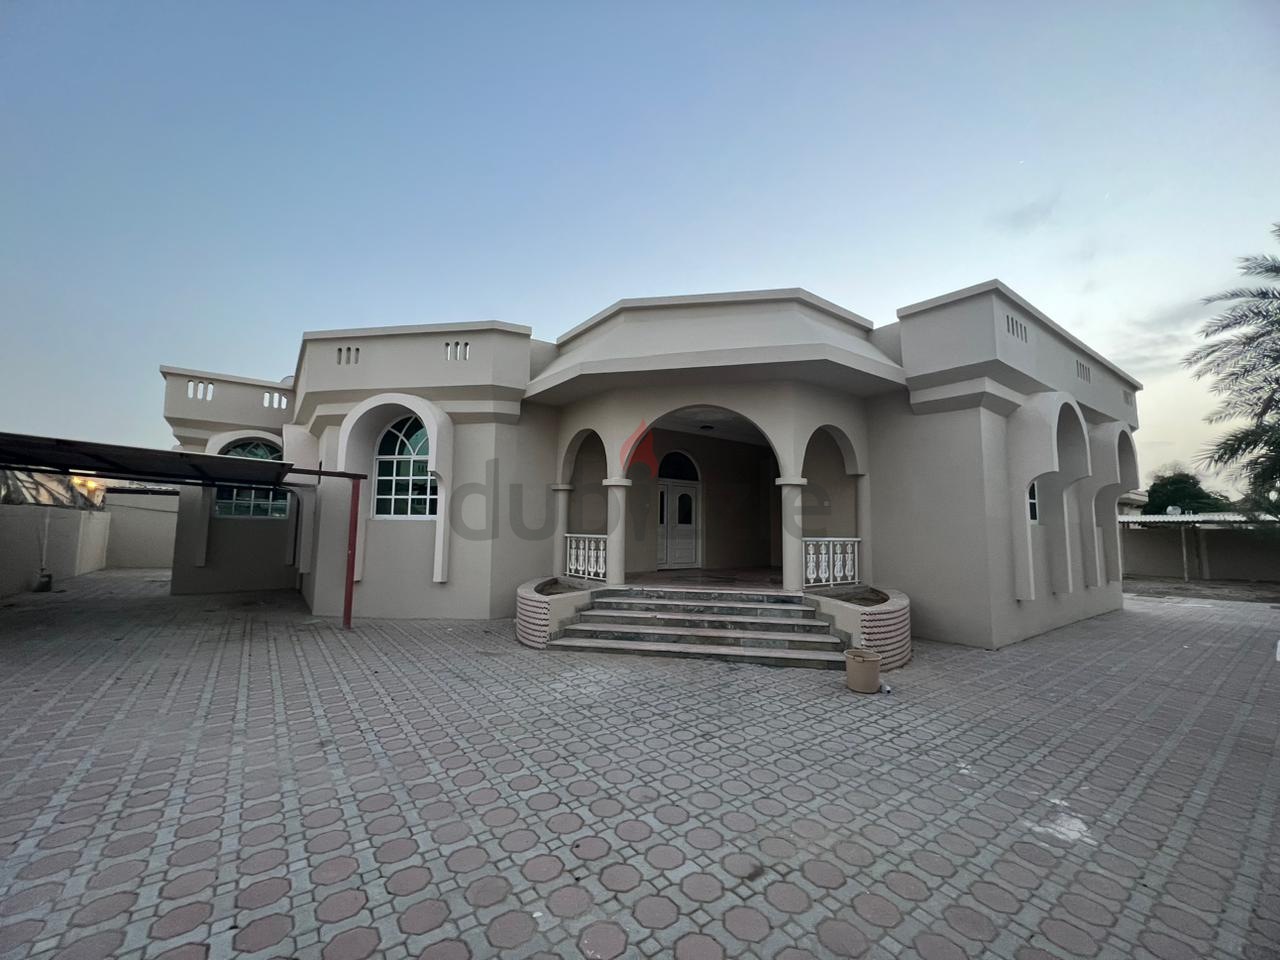 For Sale In Sharjah Al-ramaqiah, One-storey House